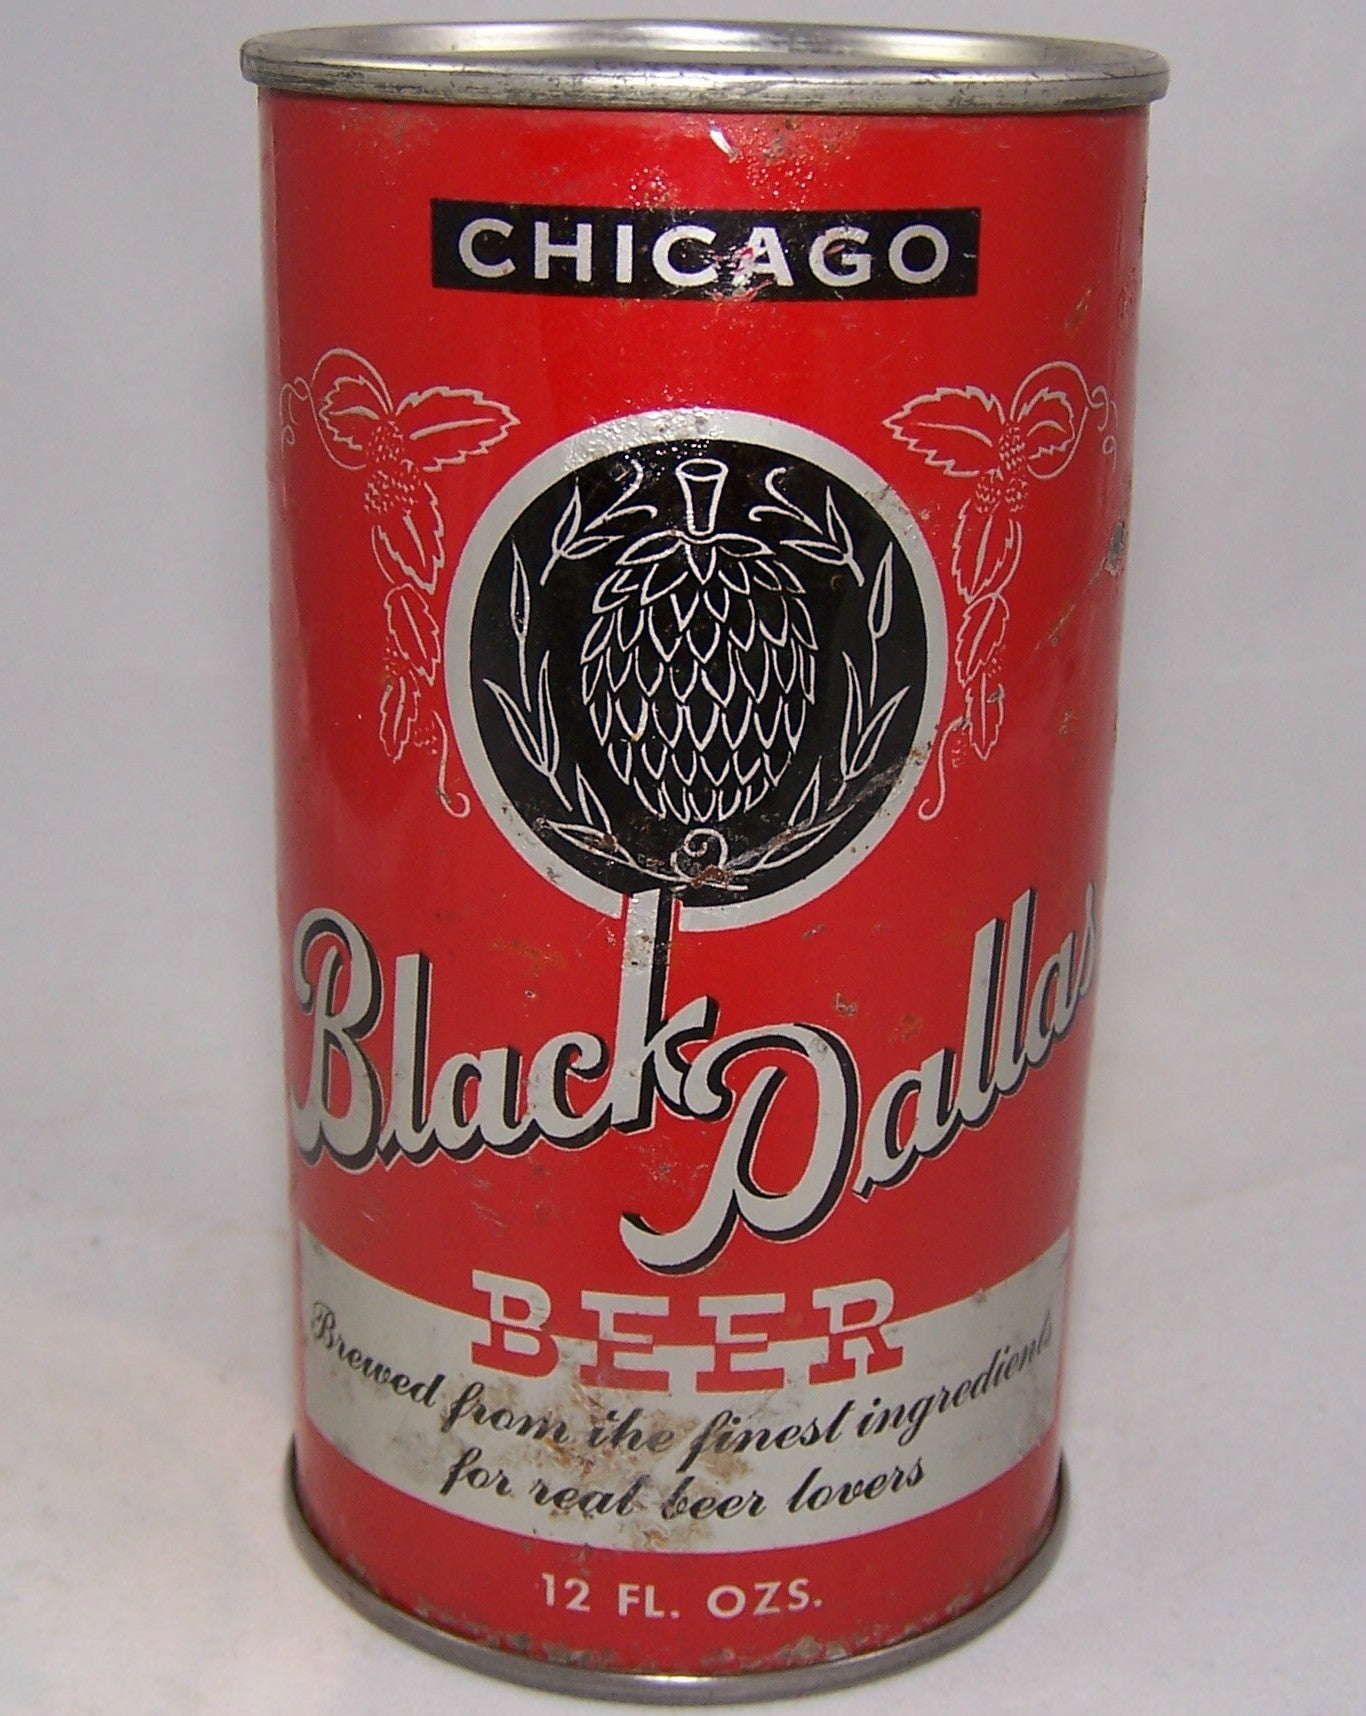 Chicago Black Dallas (Blacked out) Lilek # 113, Grade 1 -/2+Sold on 10/14/15